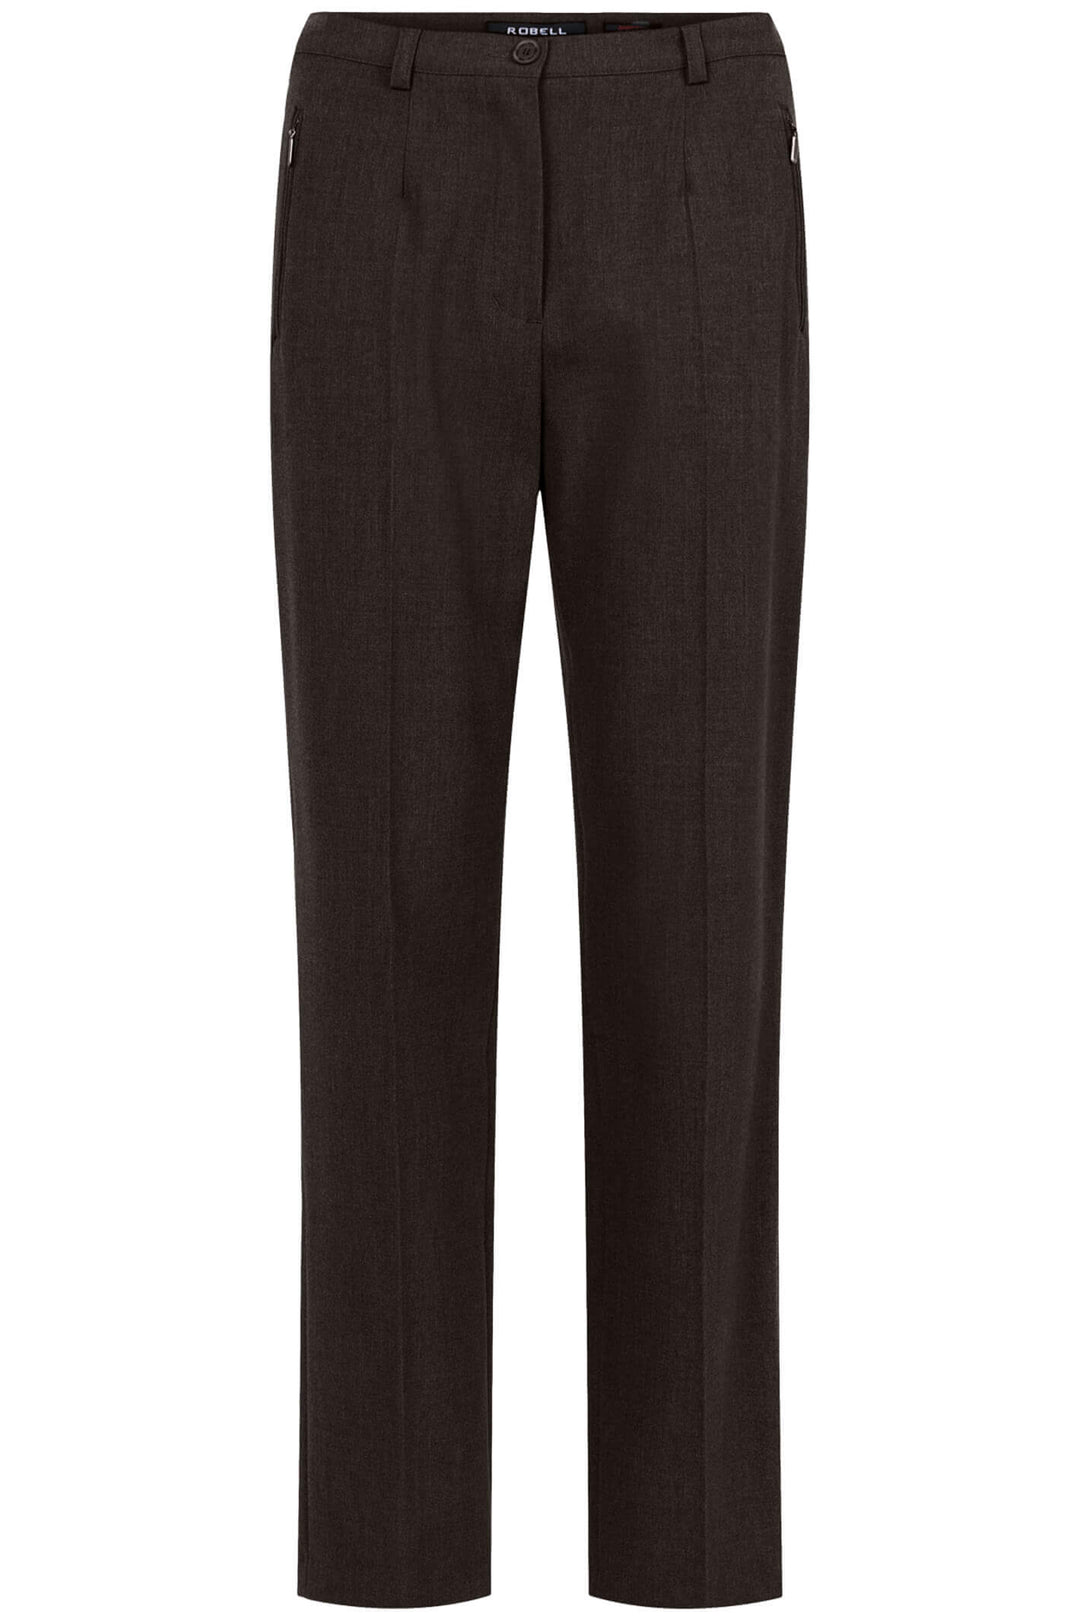 Robell 51562 39 Brown Sahra Classic Trouser - Experience Boutique